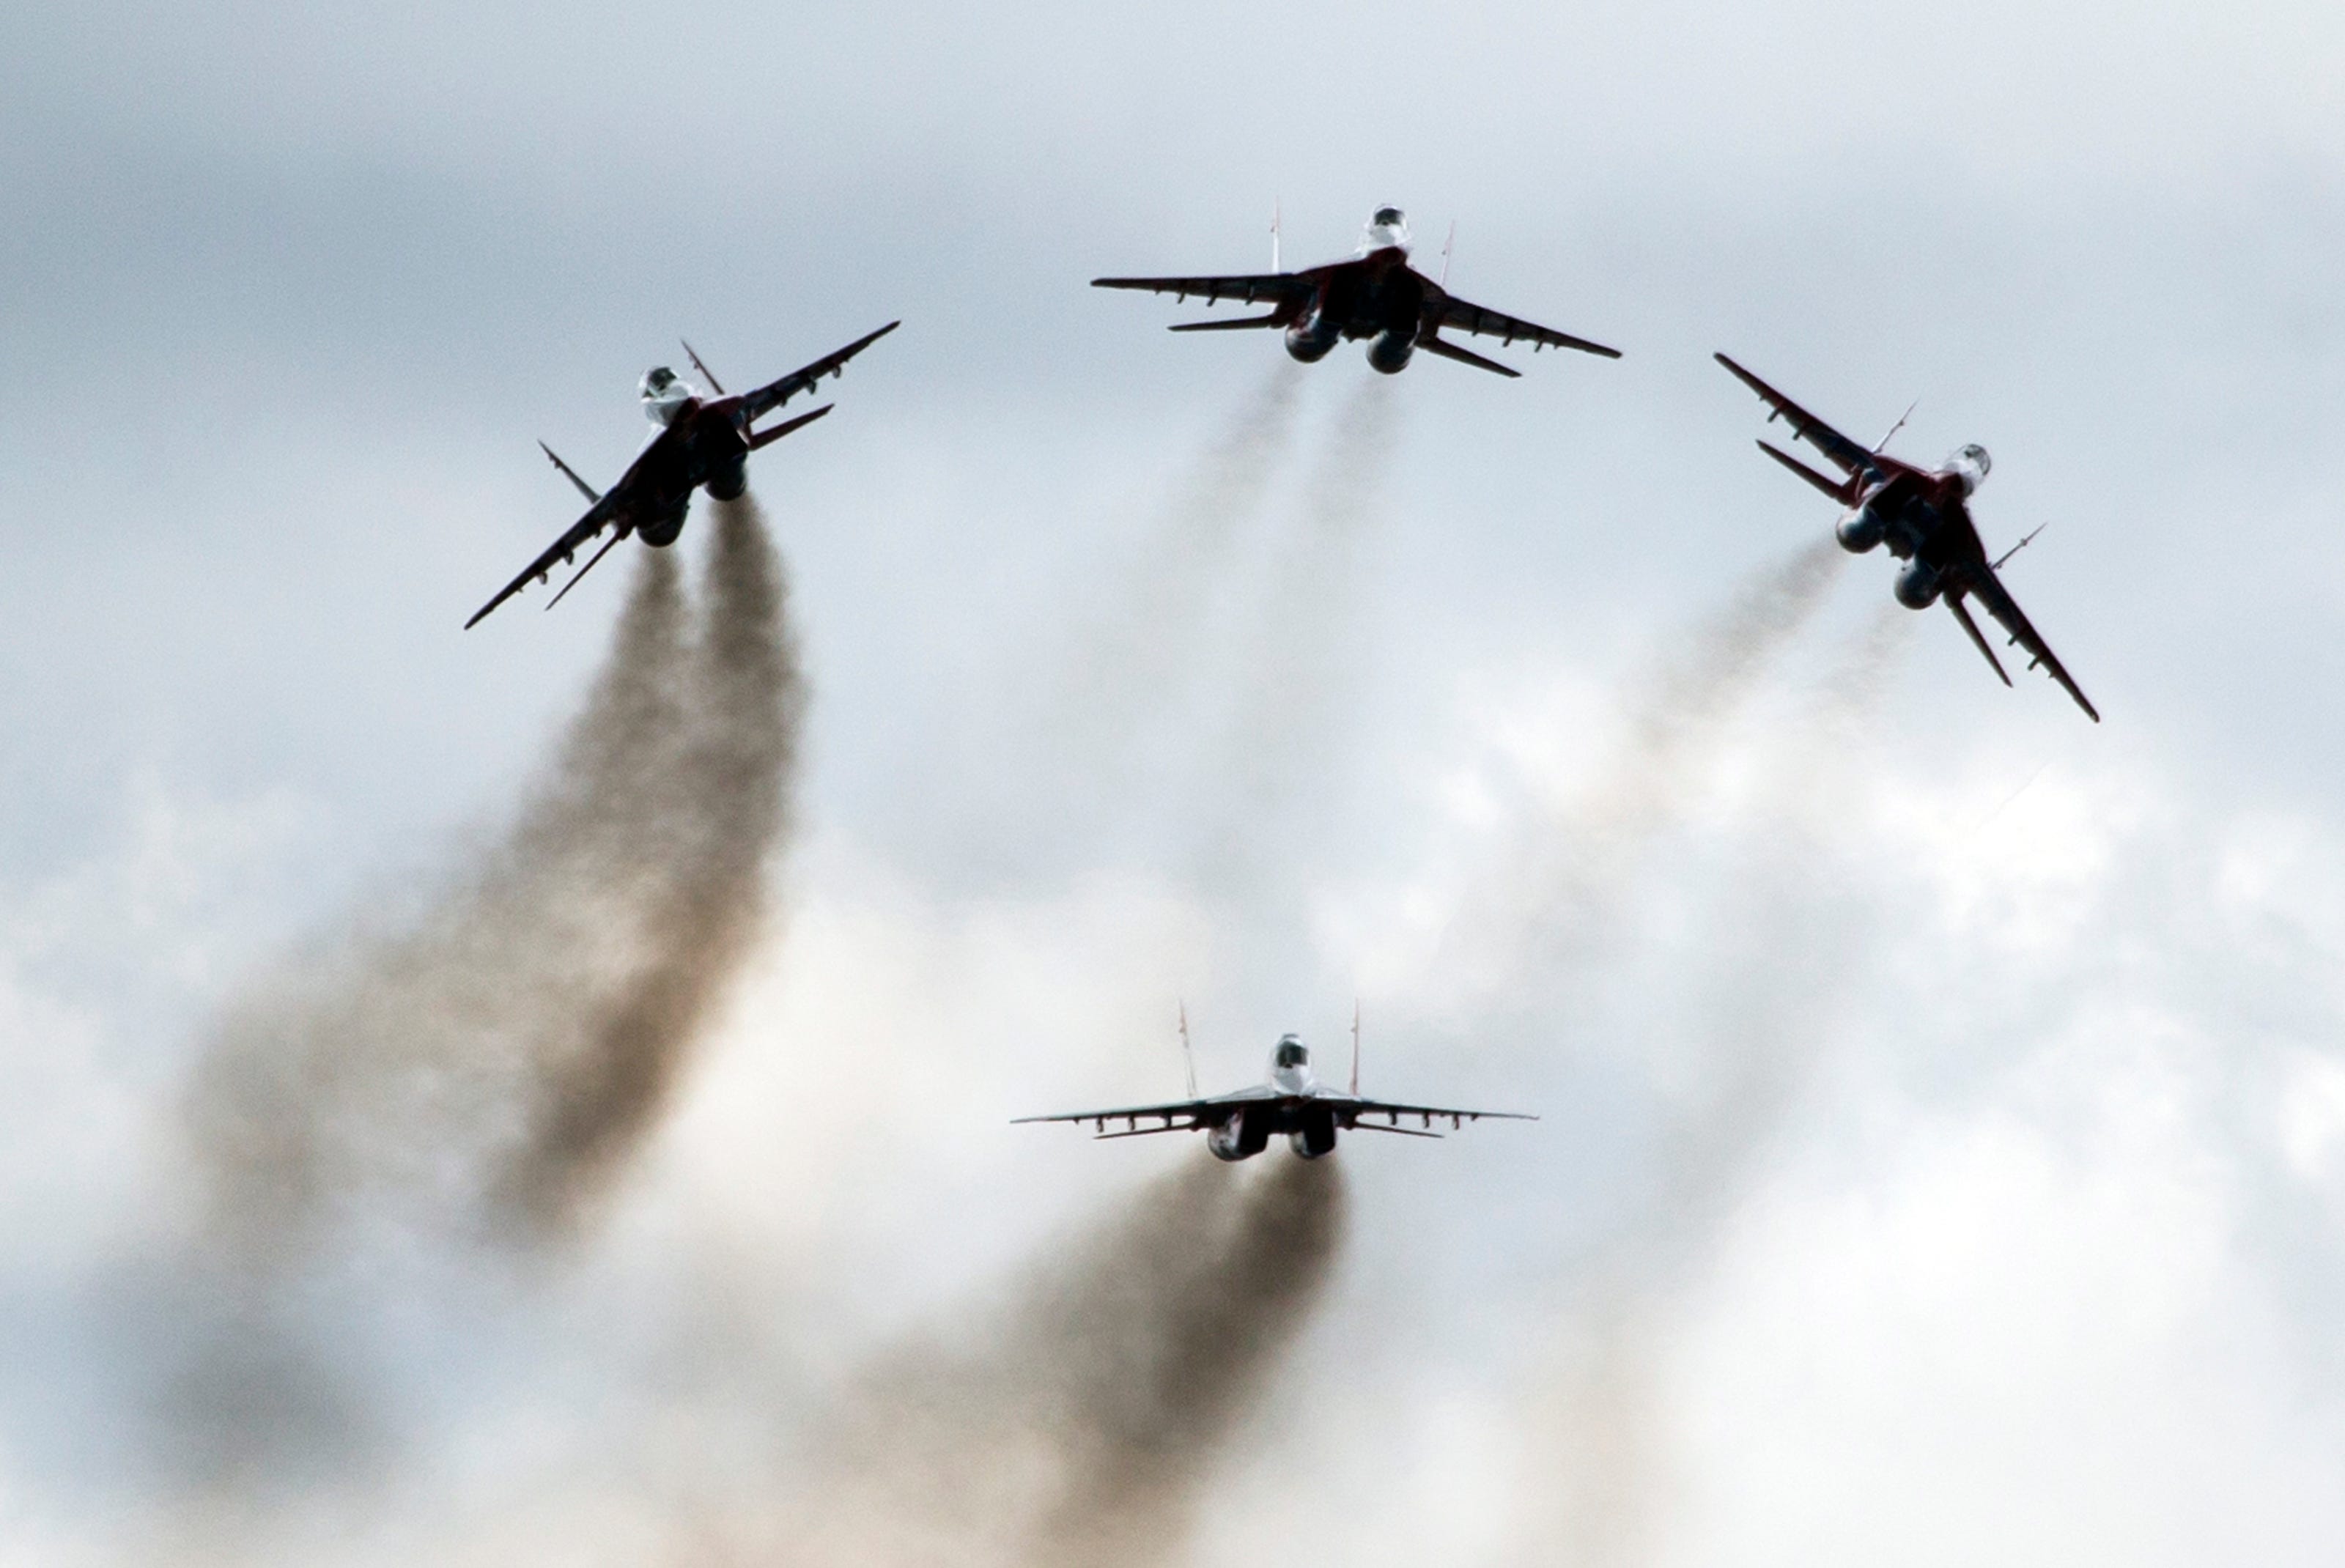 Fact check: Image shows 2015 Russian air show, not downed plane in Ukraine